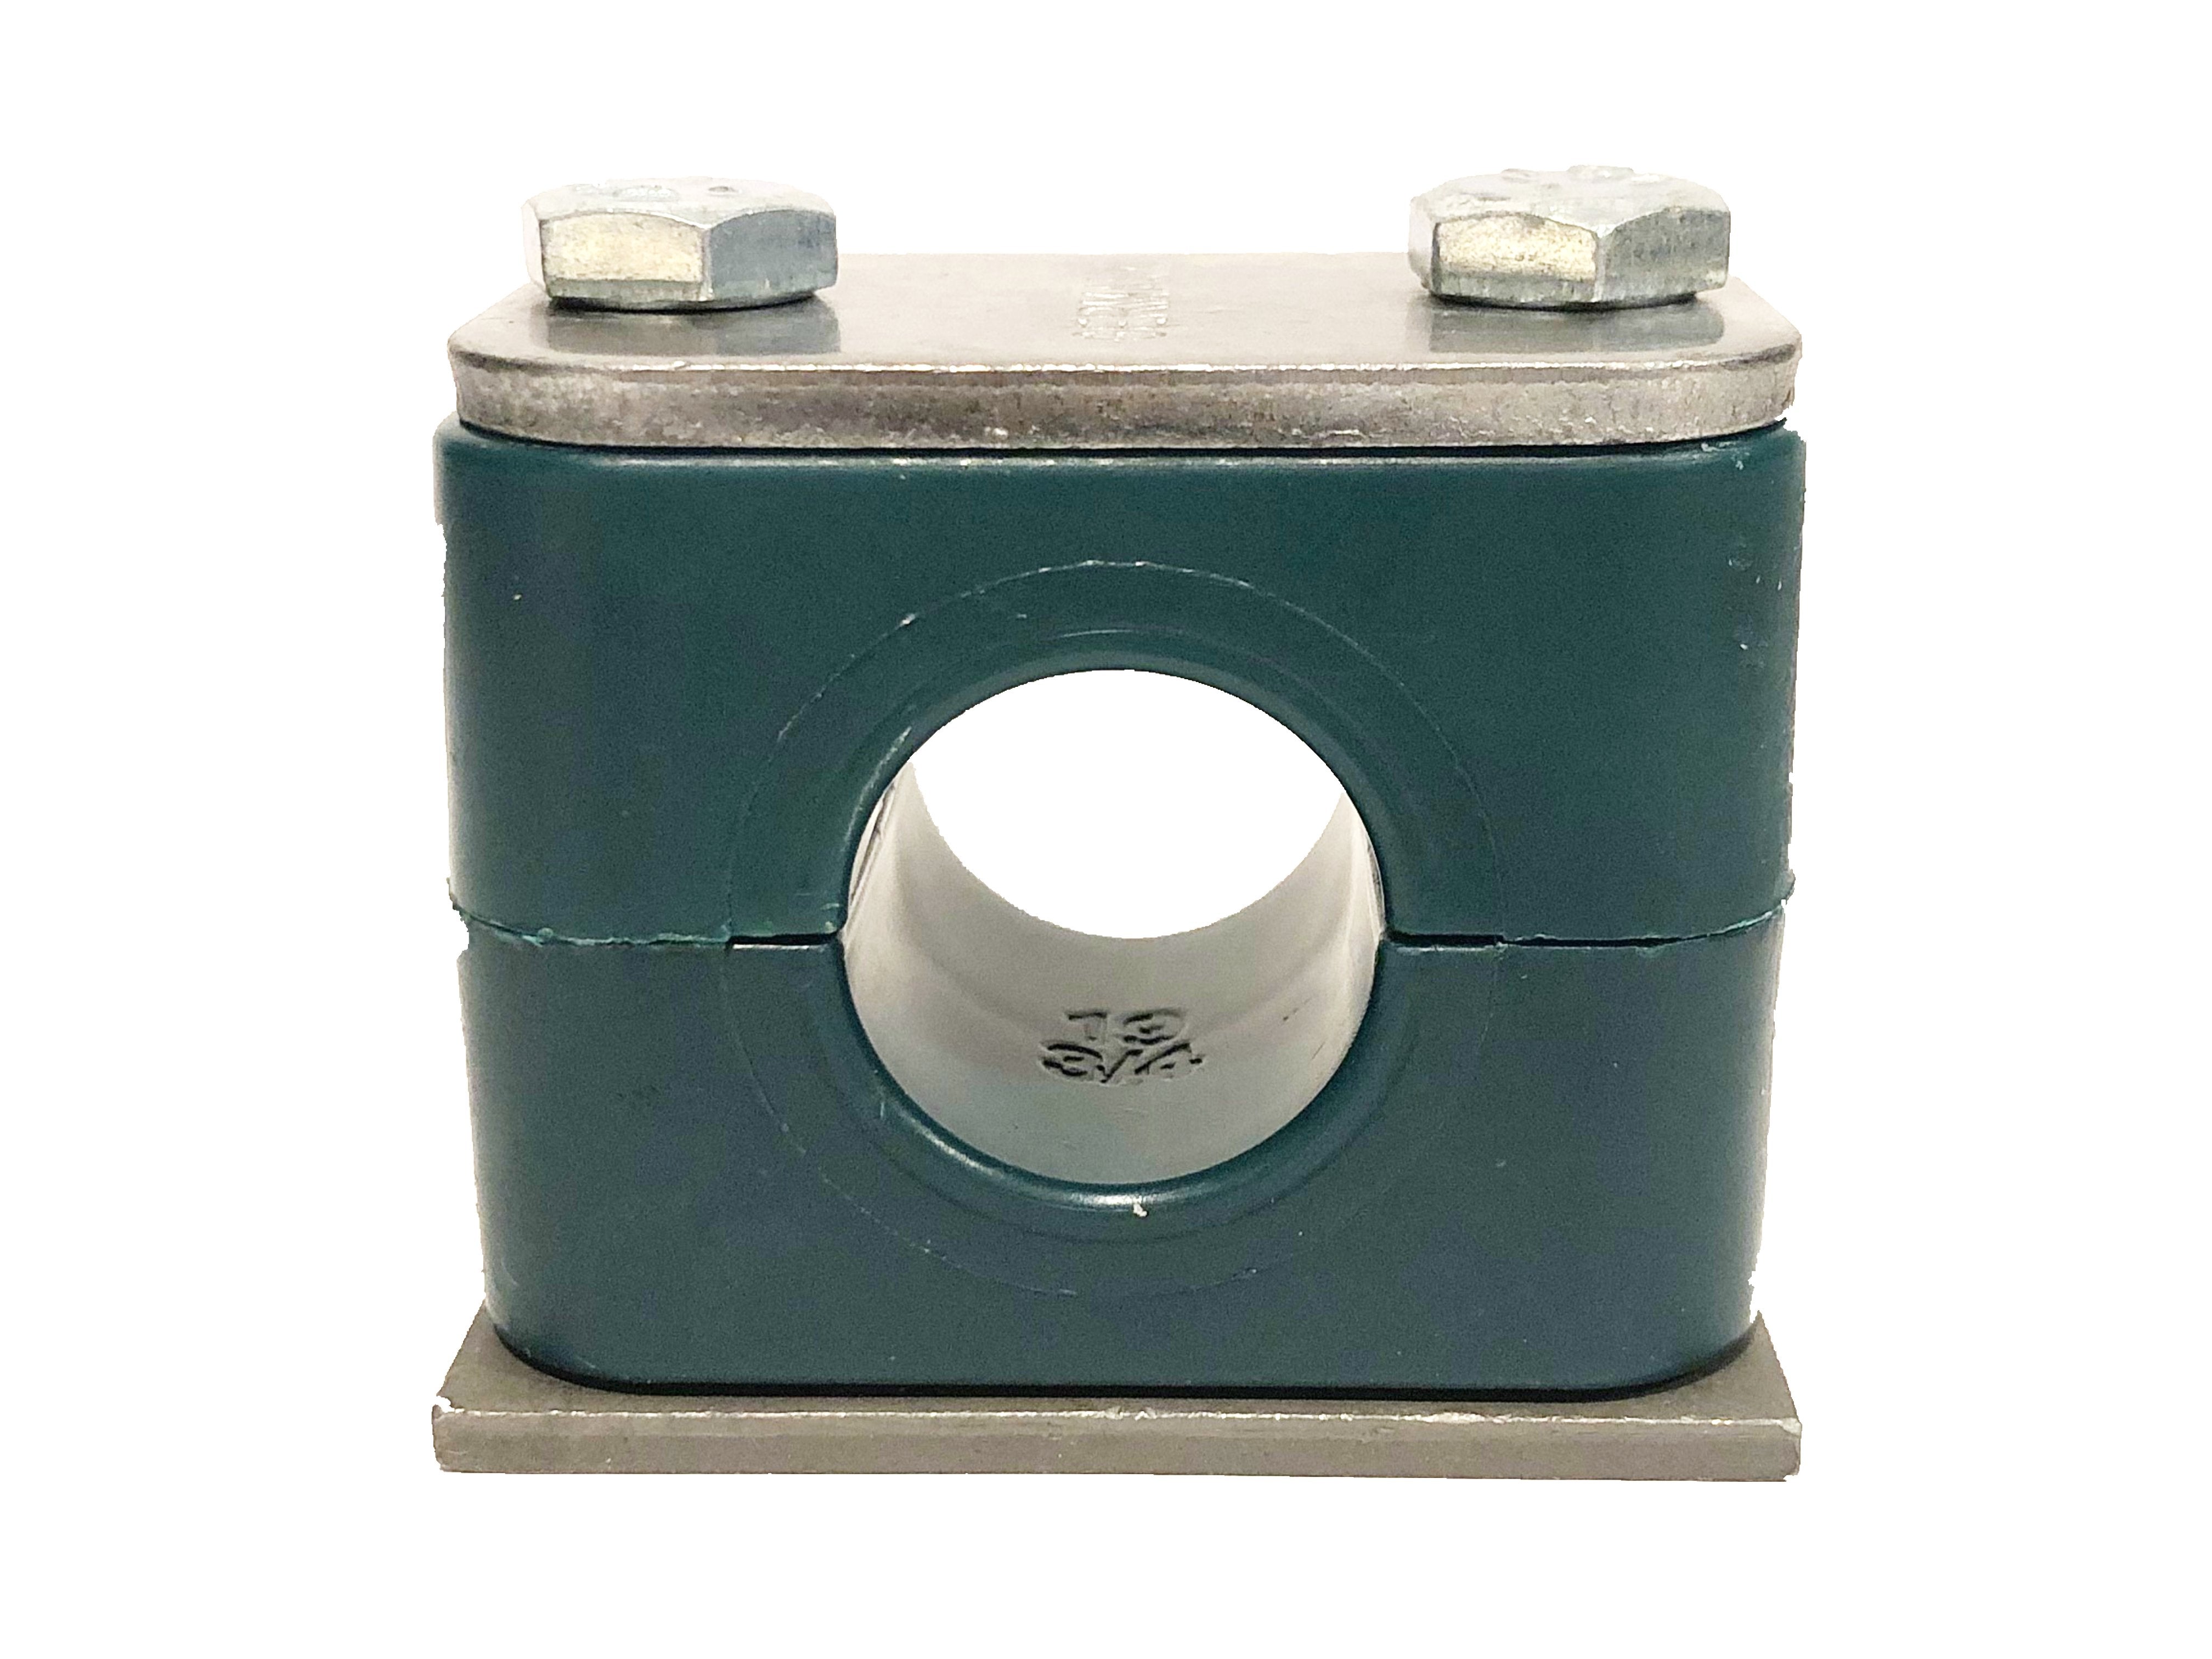 SP-110A-PP-H-DP-AS-U-W10 : Stauff Clamp, Single Weld Plate, 0.394" (10mm) OD, for 1/8" Pipe, Green PP Insert, Smooth Interior, Carbon Steel